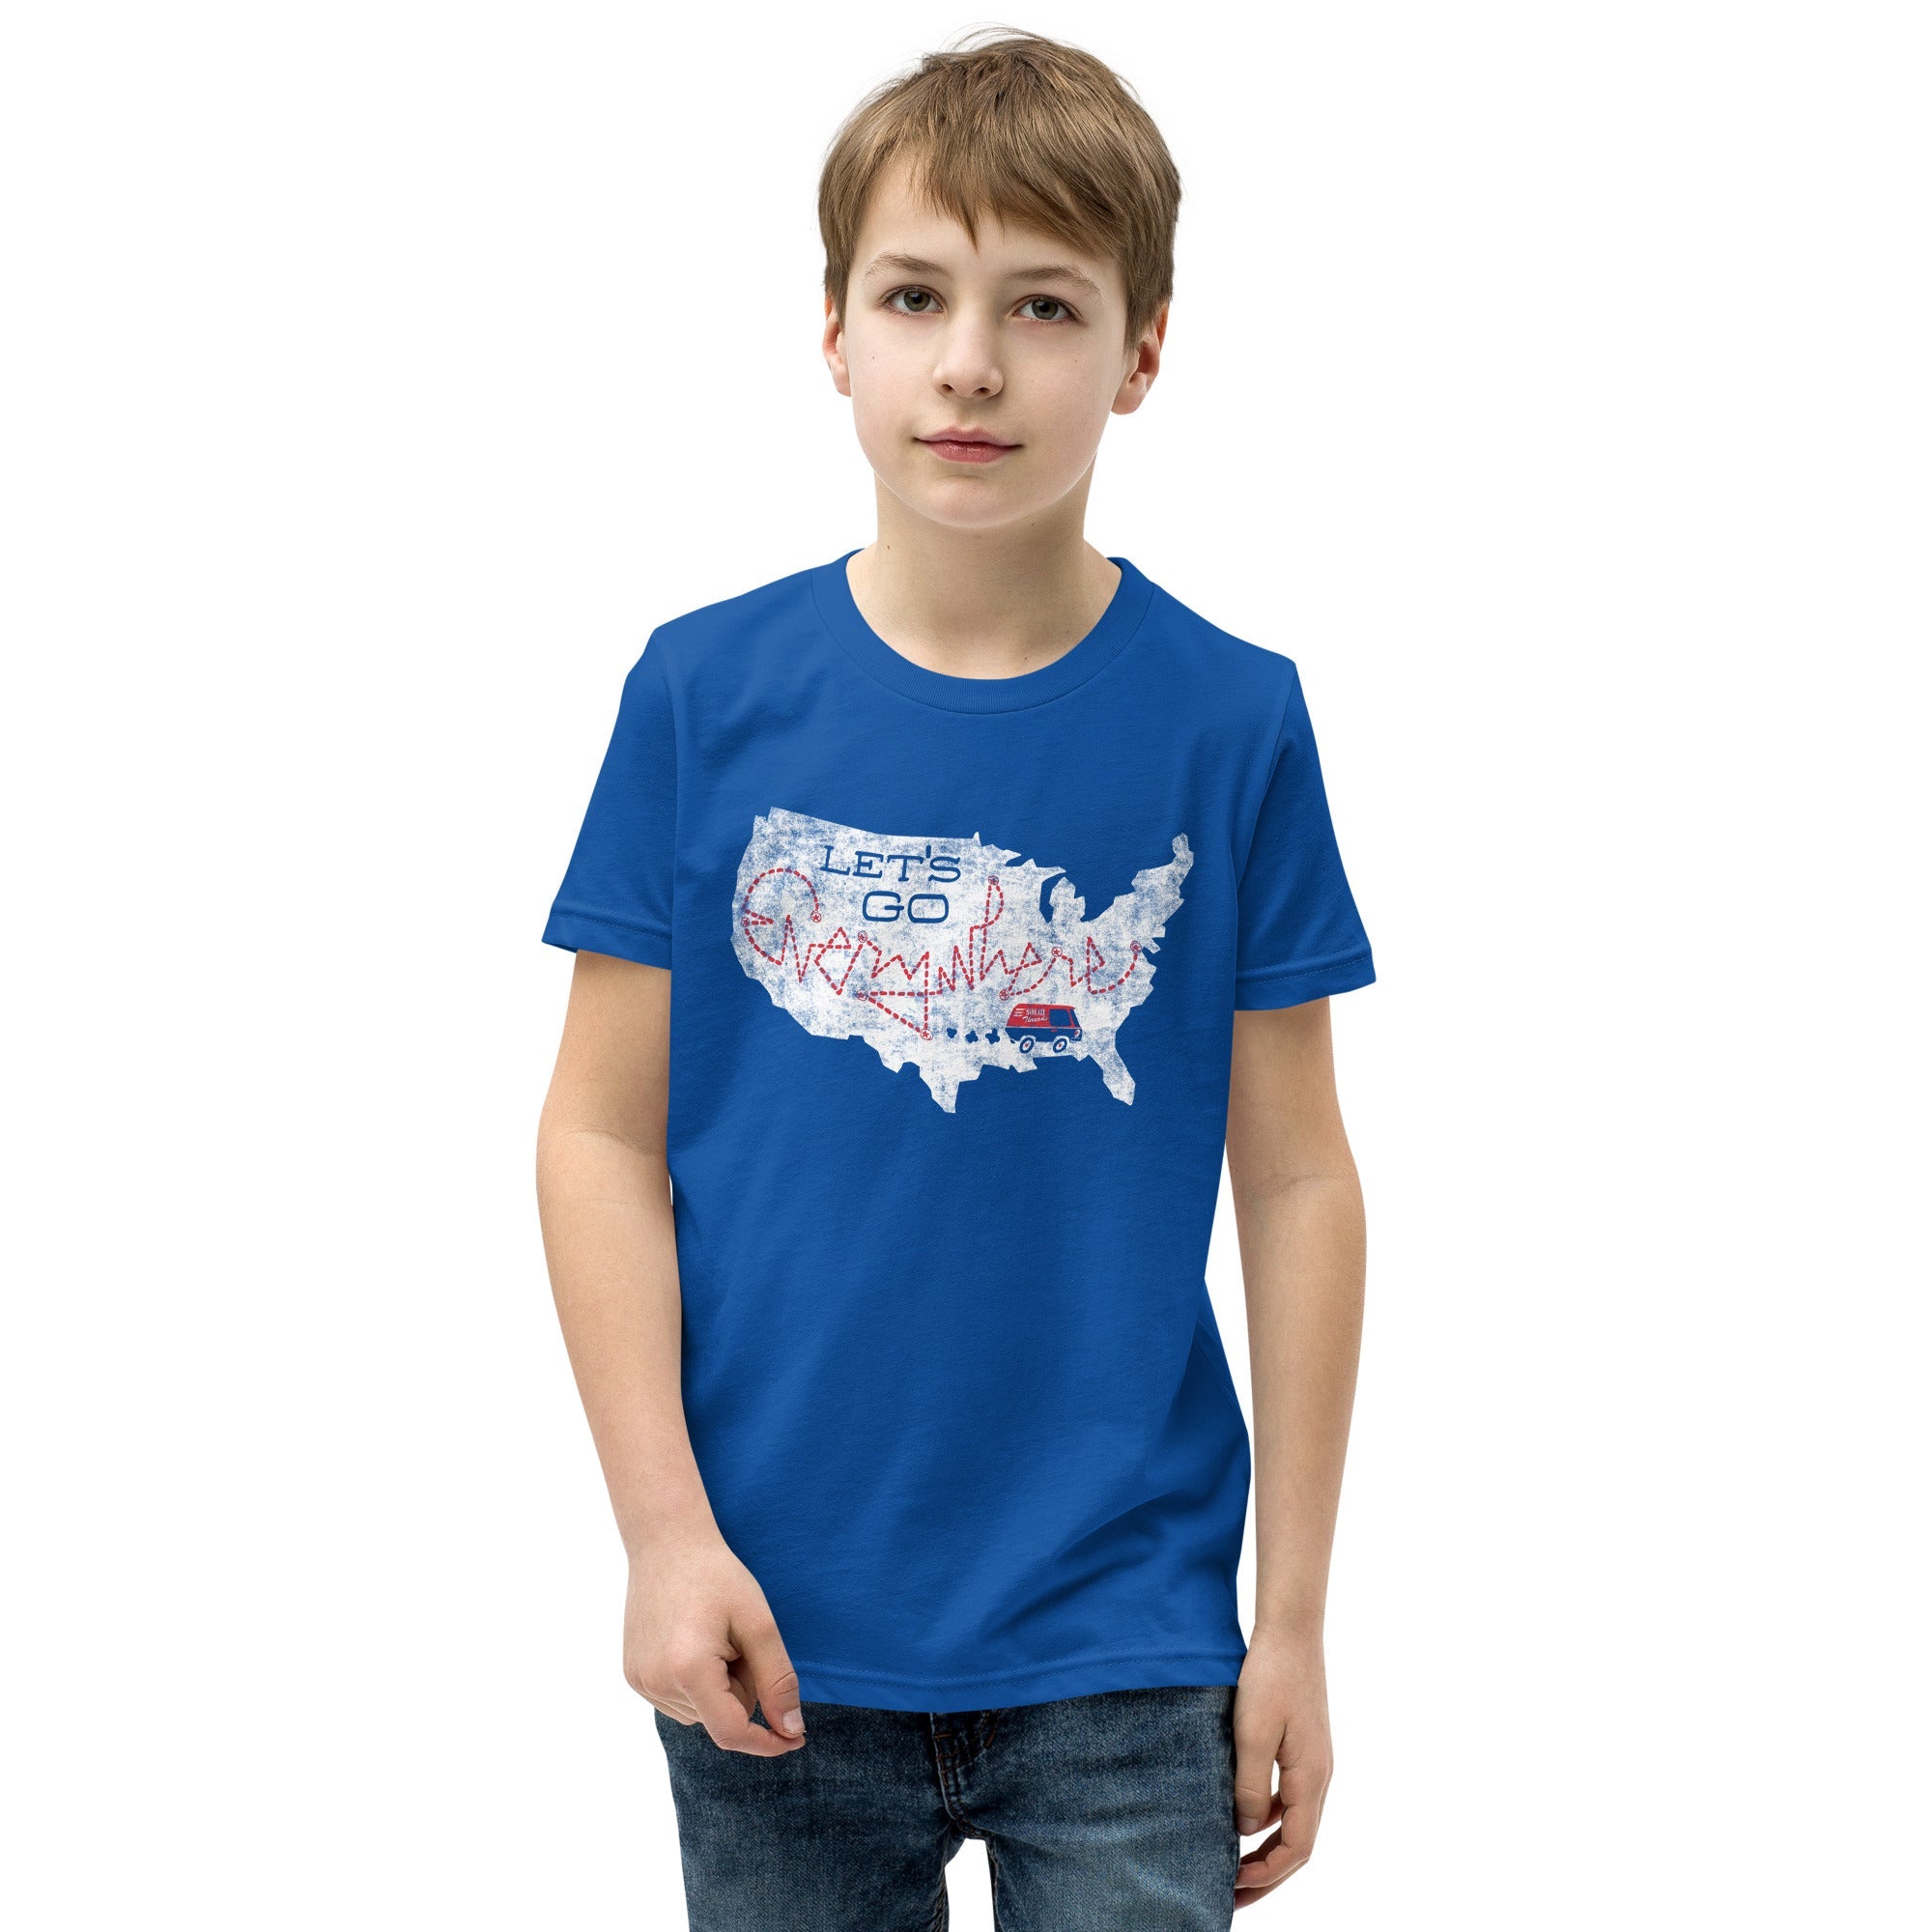 Youth Lets Go Everywhere Cool Extra Soft T-Shirt | Retro Road Trip Kids Tee Boy Model | Solid Threads